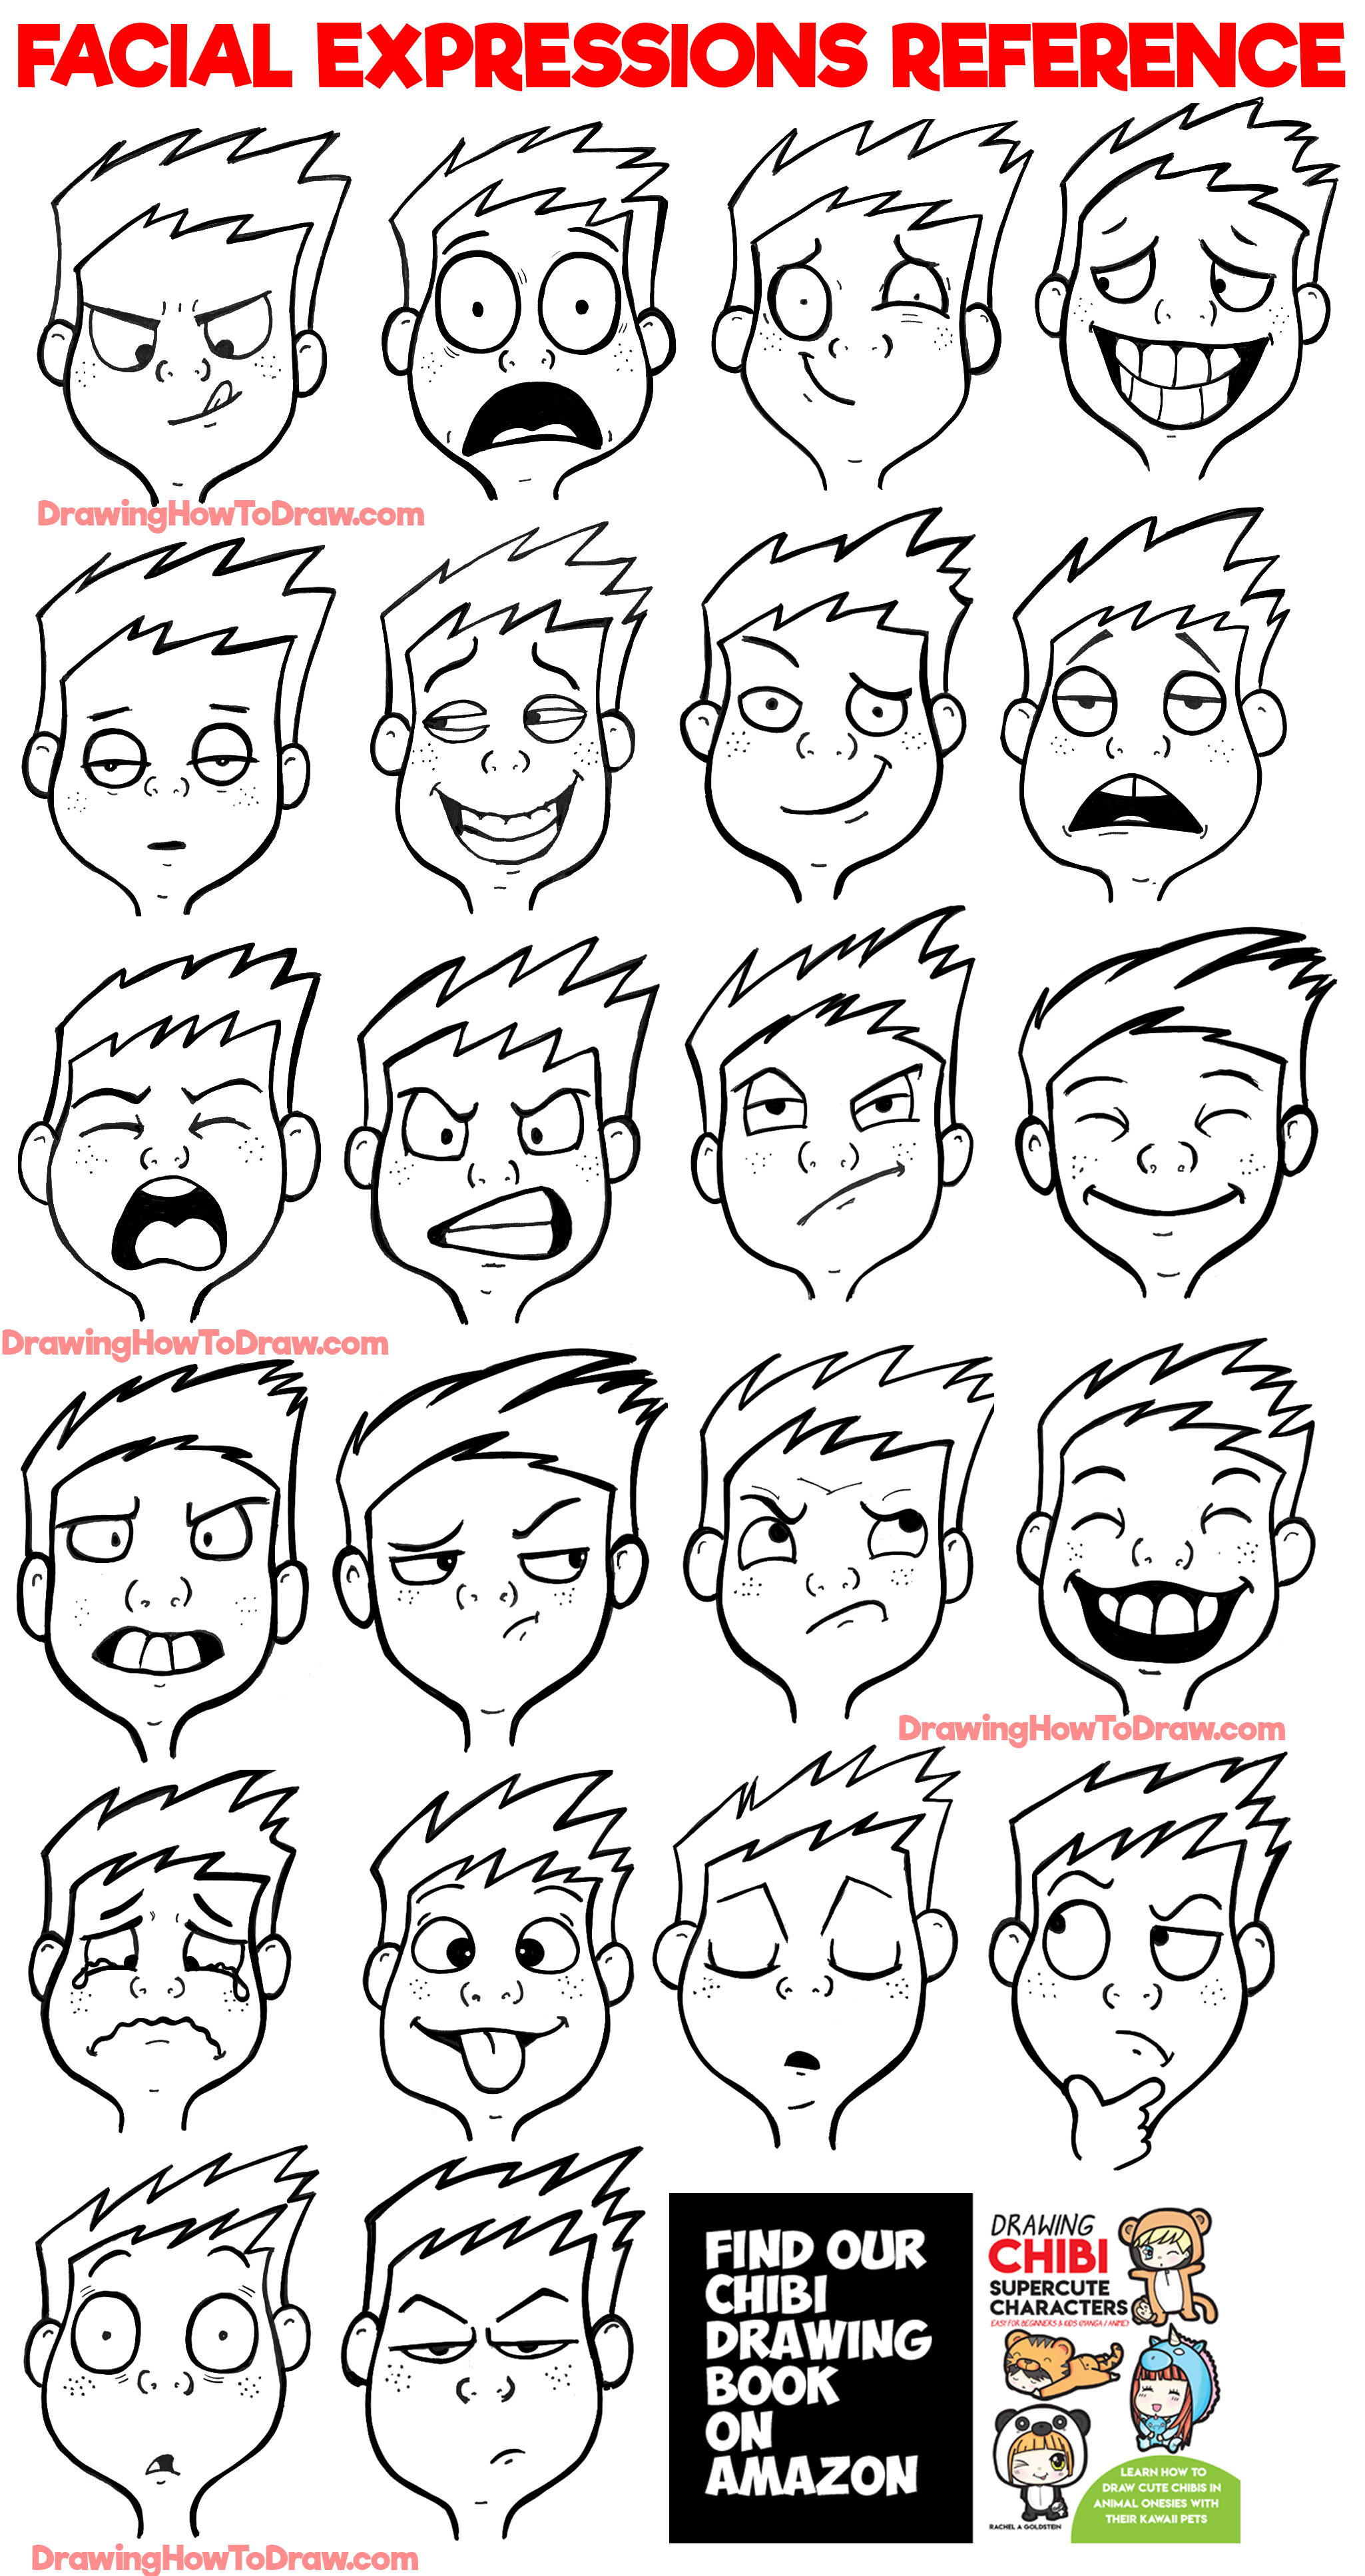 Facial Expressions and Silly Cartoon Faces Reference Sheet